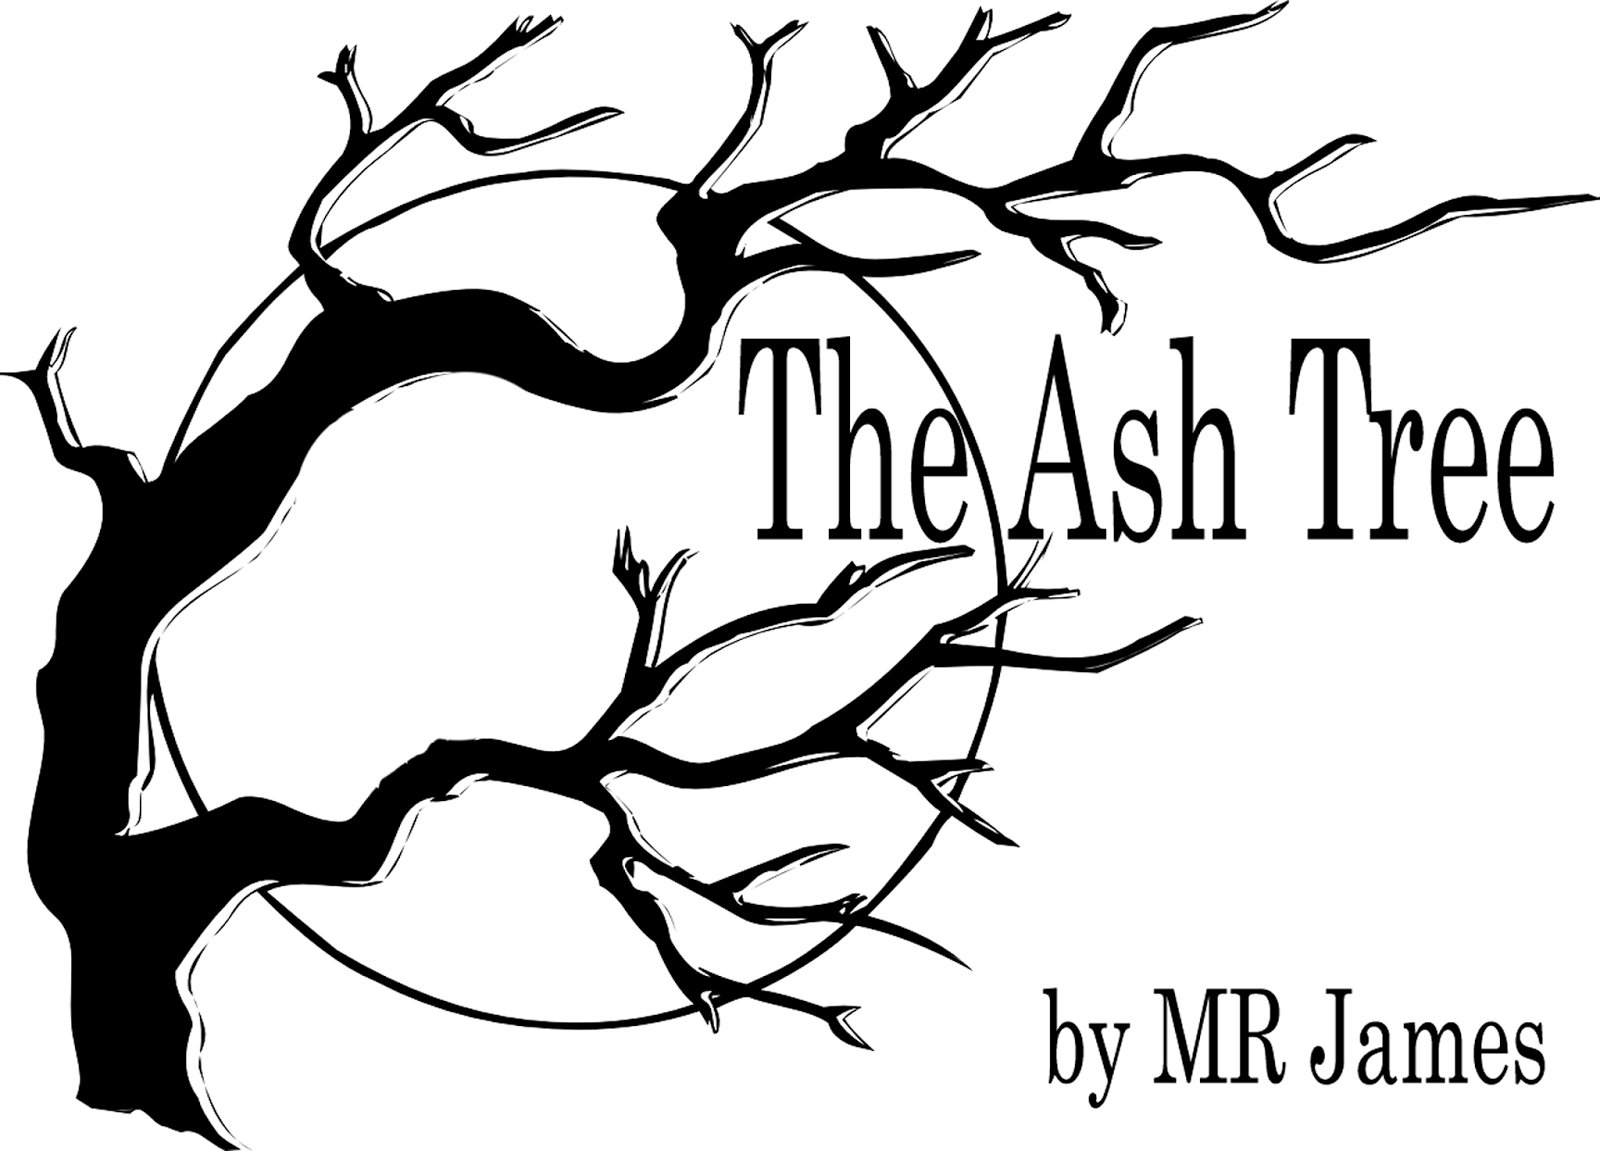 Wyrd Britain: Short Story - 'The Ash Tree' by M.R.James